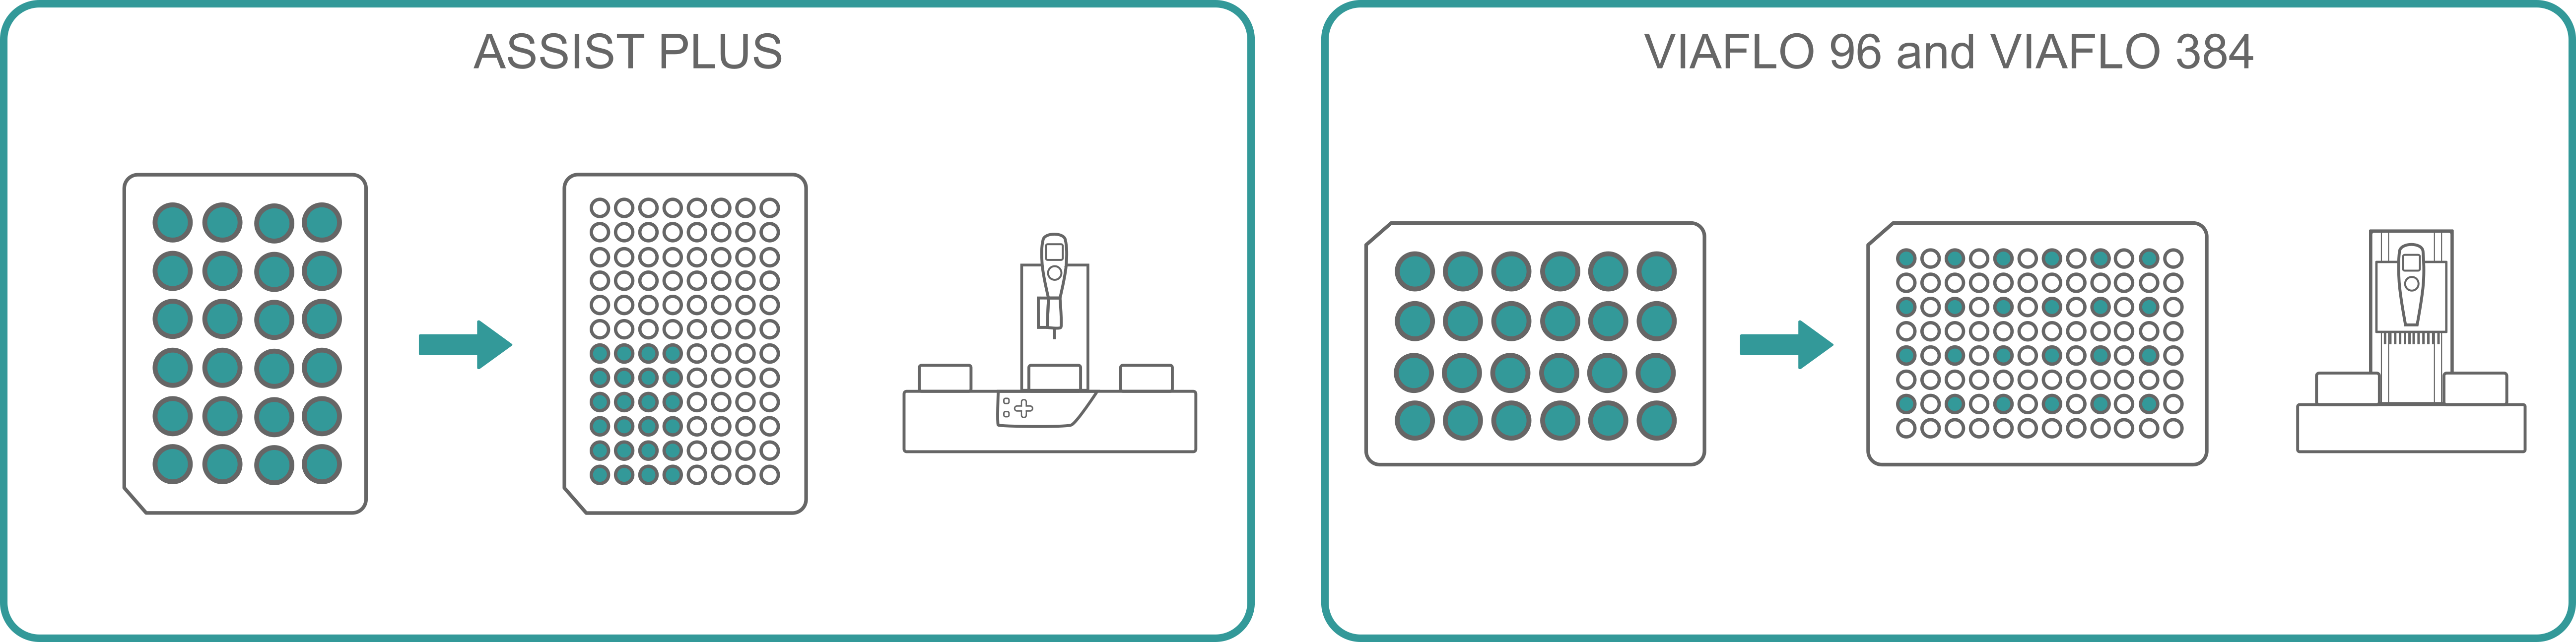 Infographic showing the different pipetting position for the ASSIST PLUS, VIAFLO 96 and VIAFLO 384 during sample transfer from a 24 well plate to a 96 well plate.